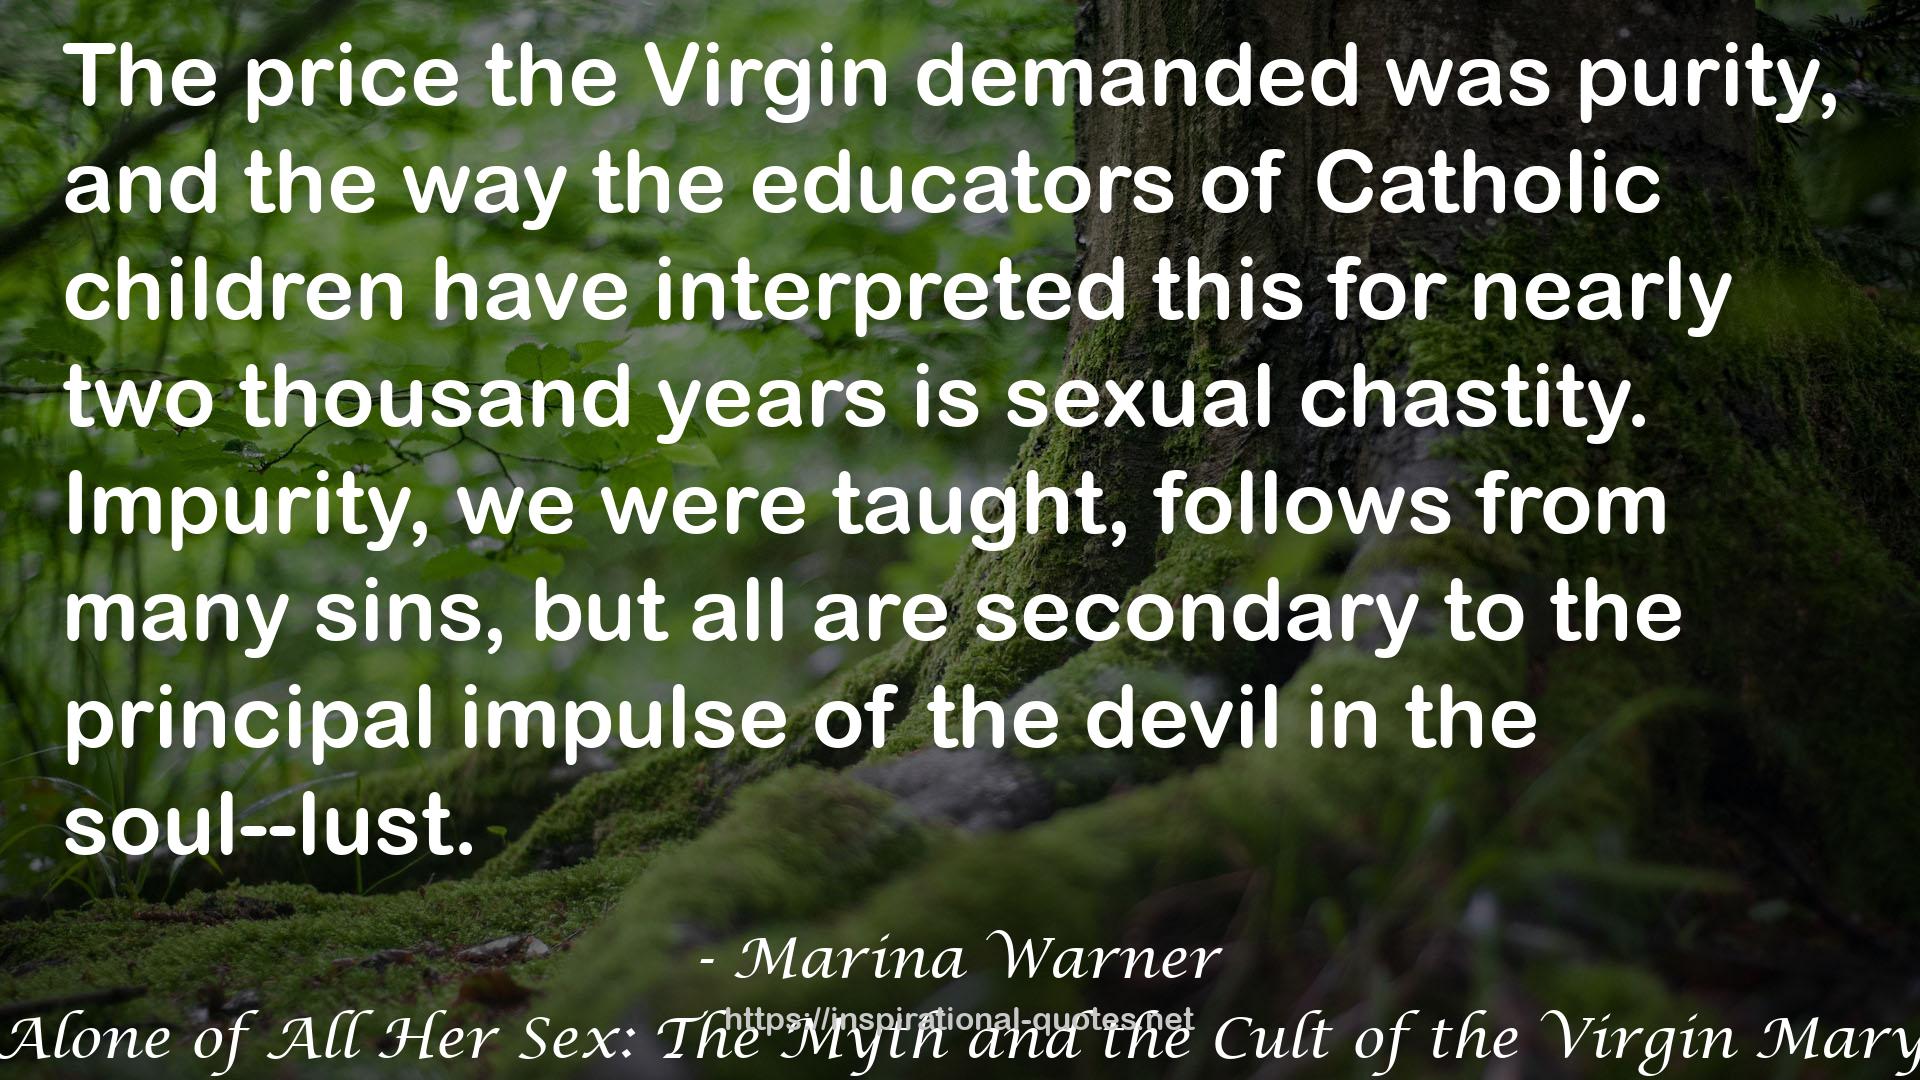 Alone of All Her Sex: The Myth and the Cult of the Virgin Mary QUOTES